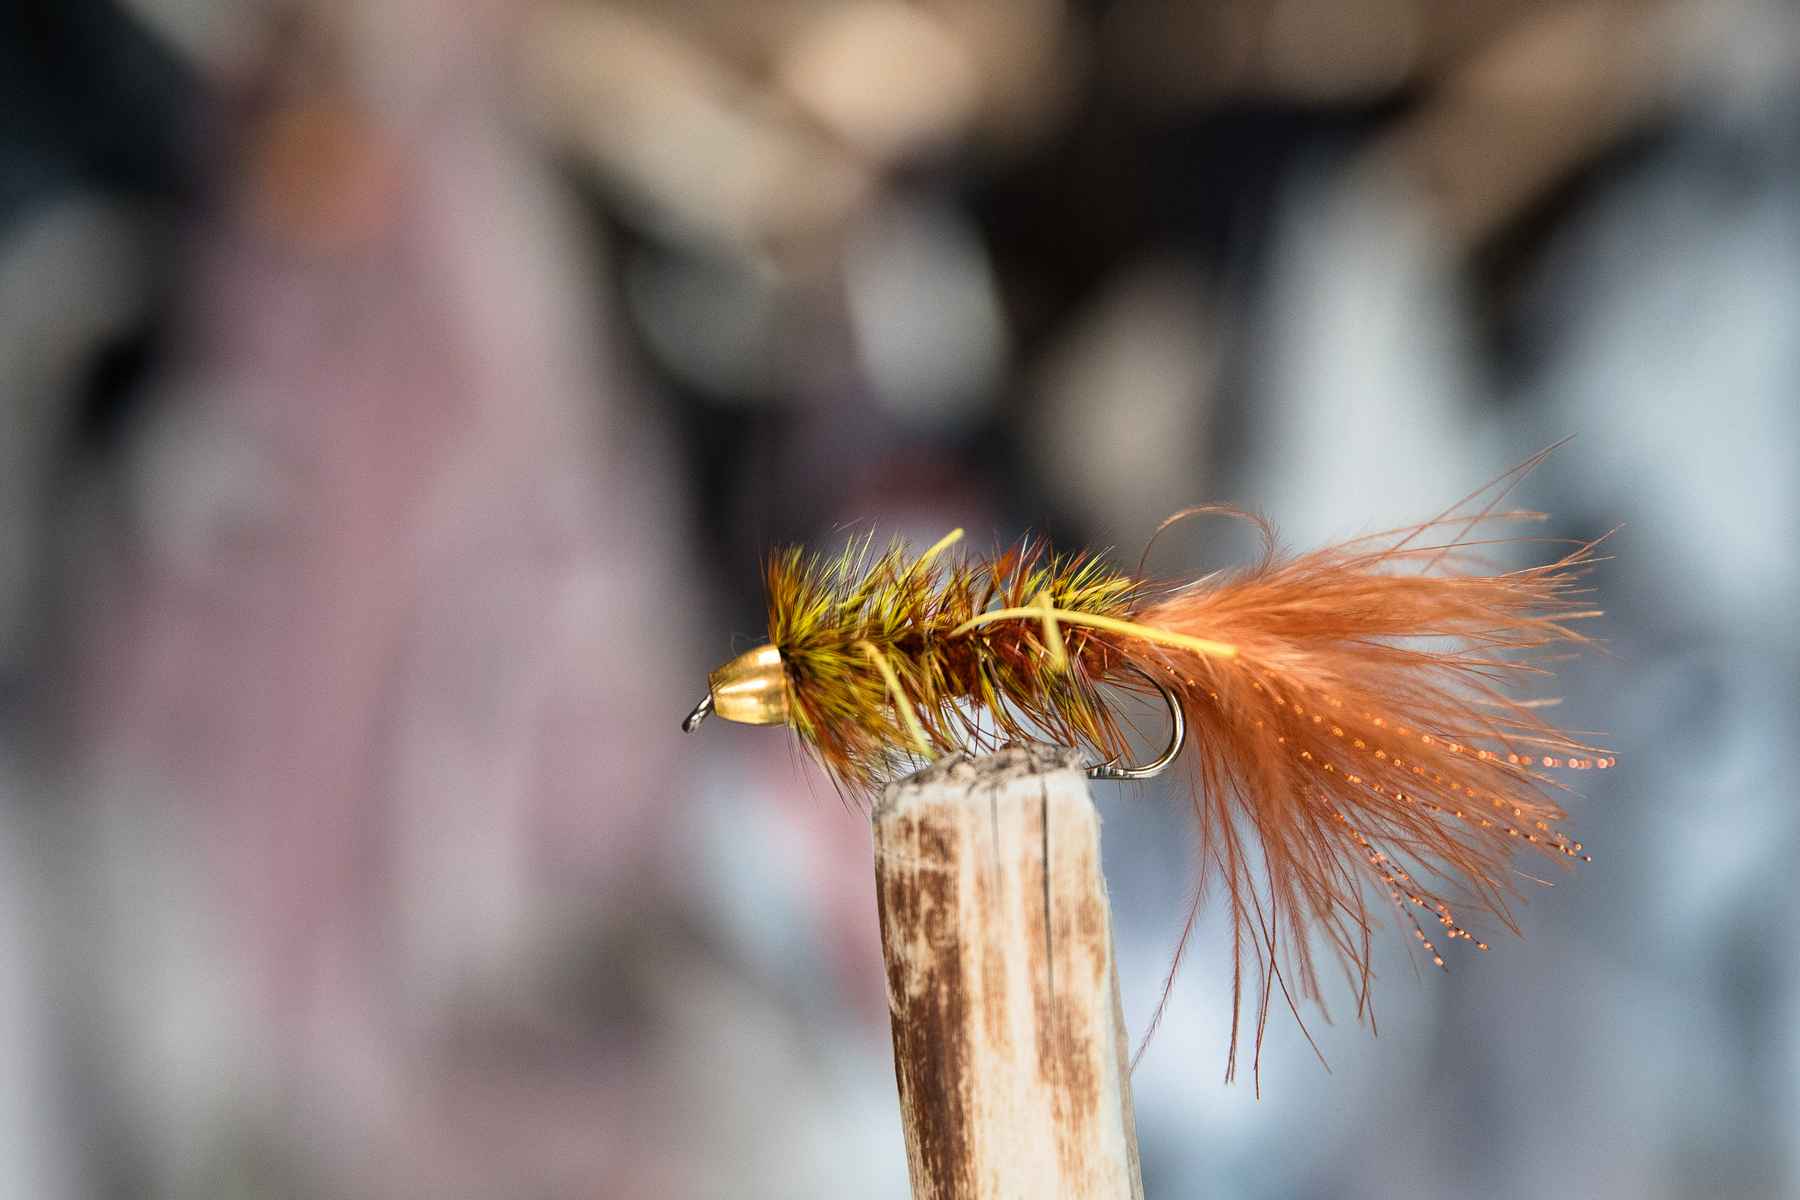 Fly Fishing Flies Barbless Fly Hooks s Include Flies Nymphs Streamers for  Trout Salmon Steelhead Fishing 12 